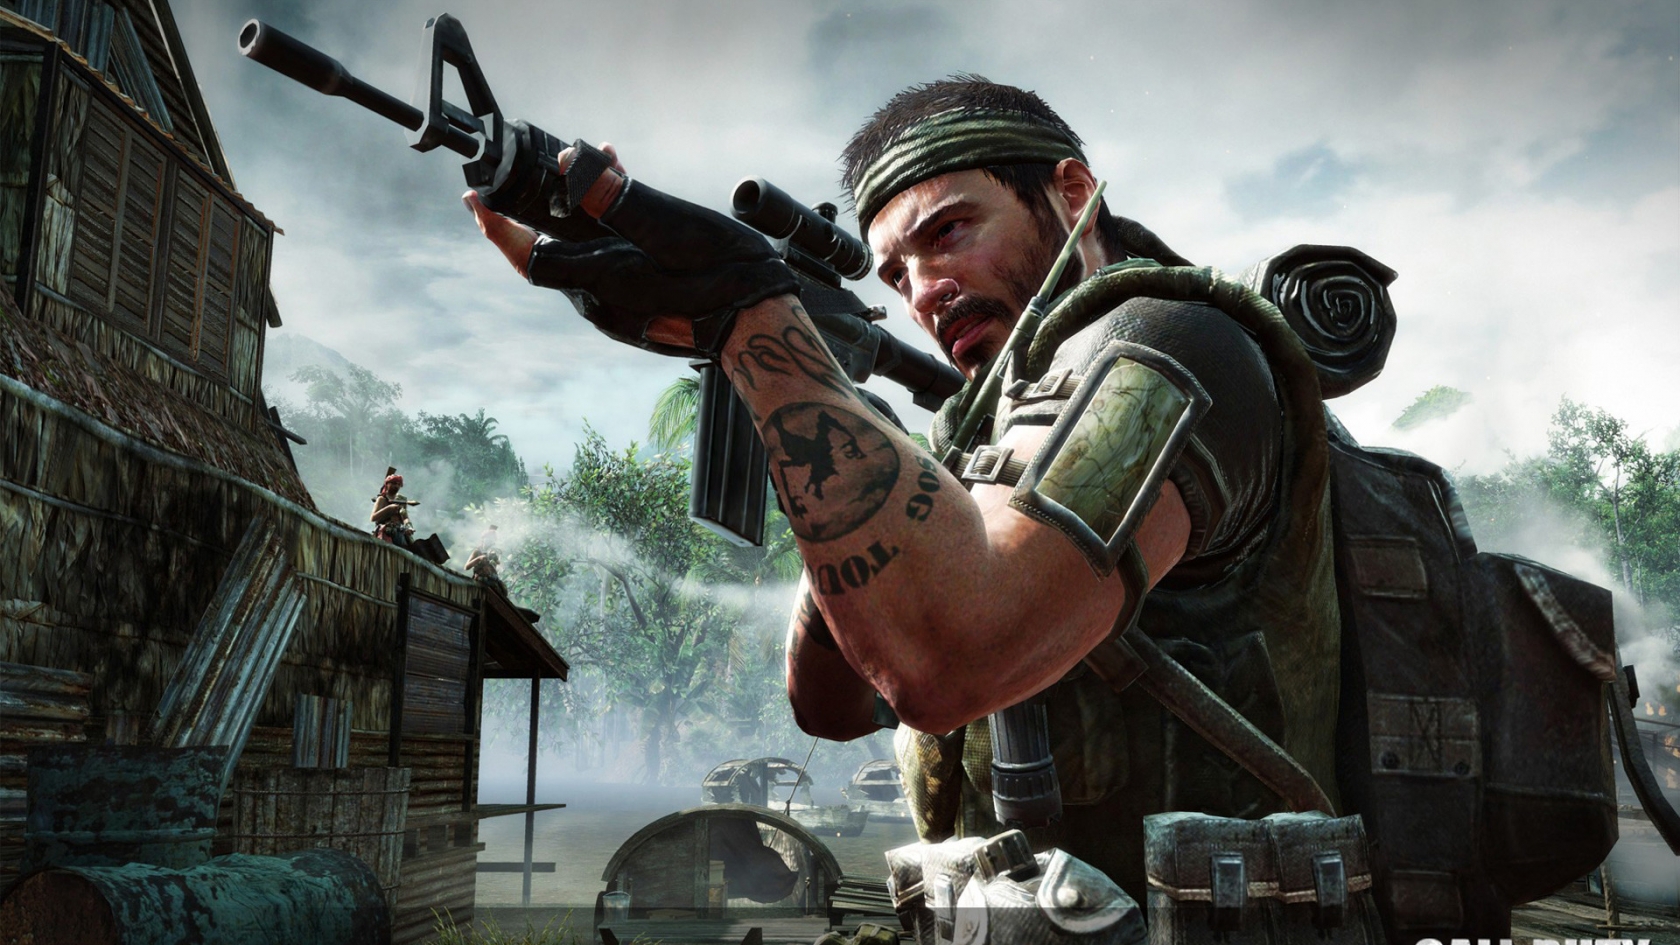 Call of Duty Black Ops Soldier for 1680 x 945 HDTV resolution